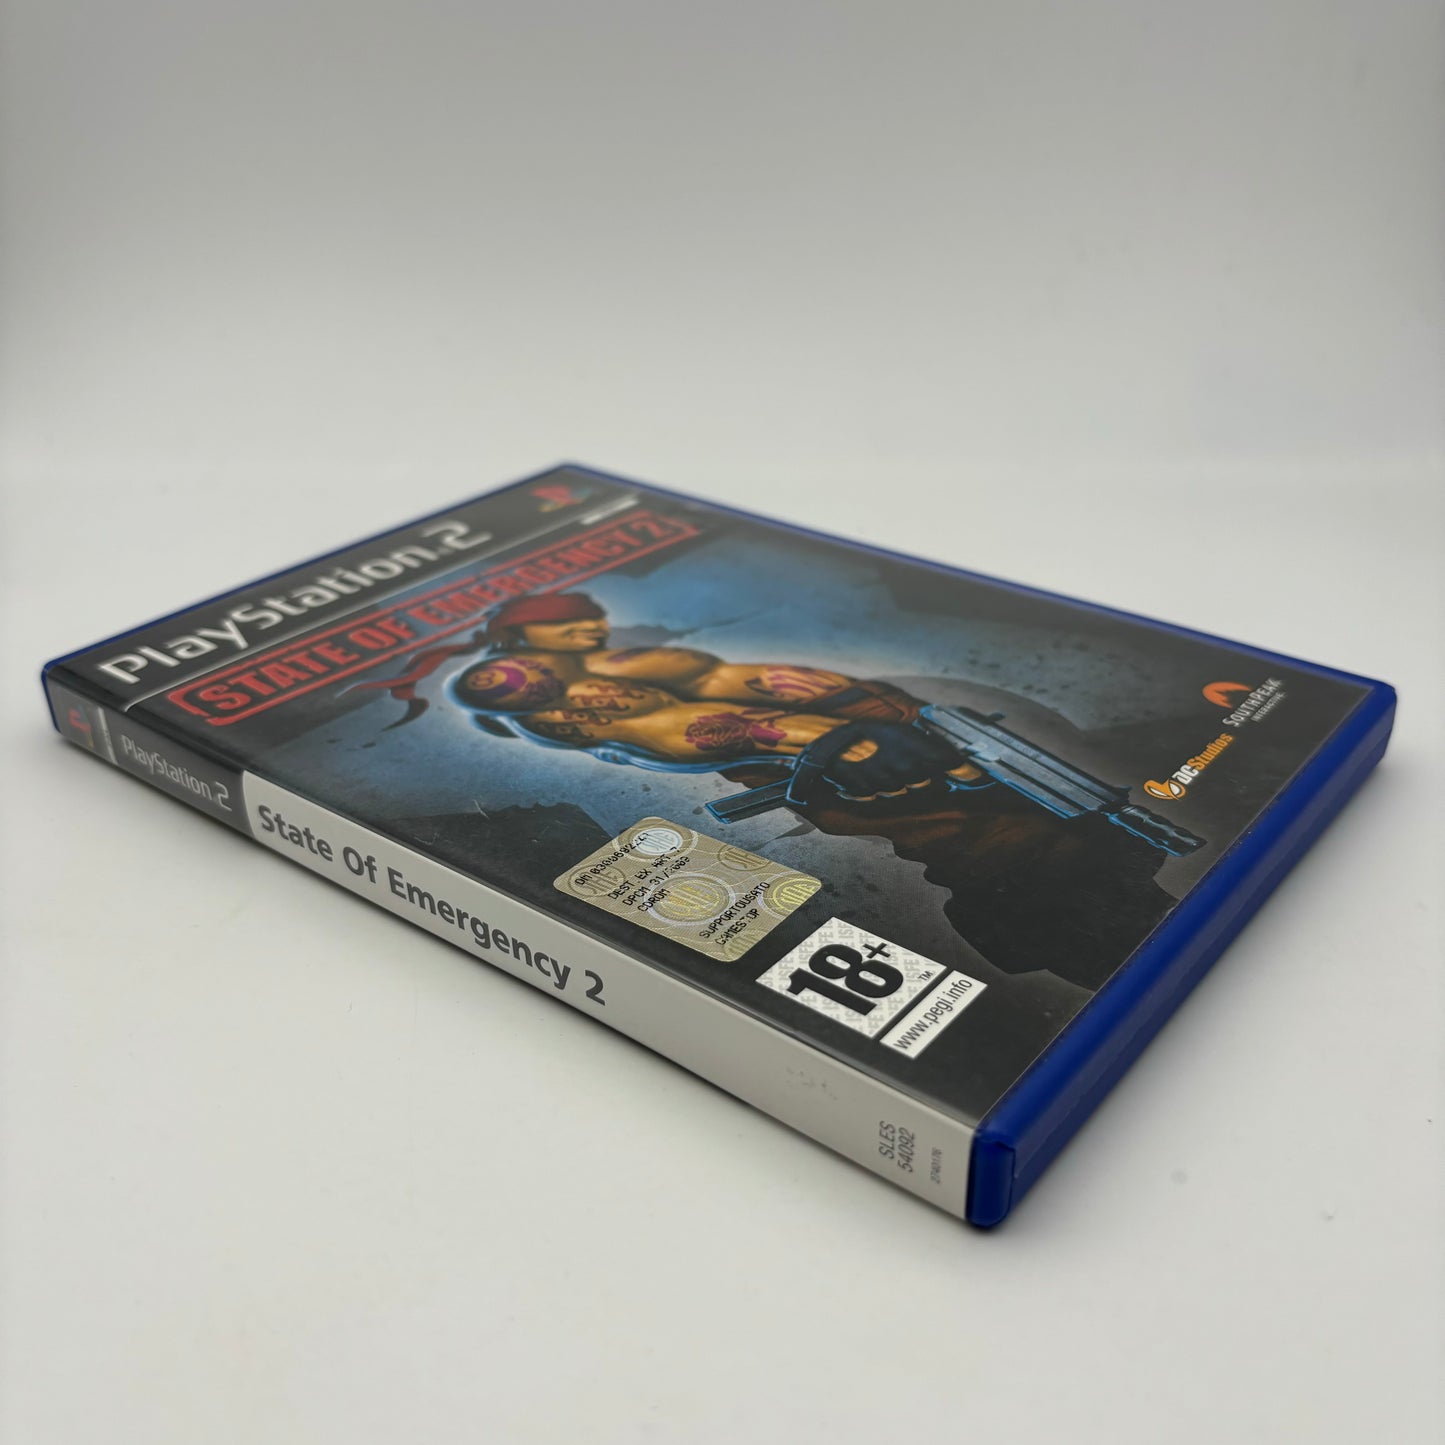 State of Emergency 2 PS2 PlayStation 2 PAL ITA (USATO)